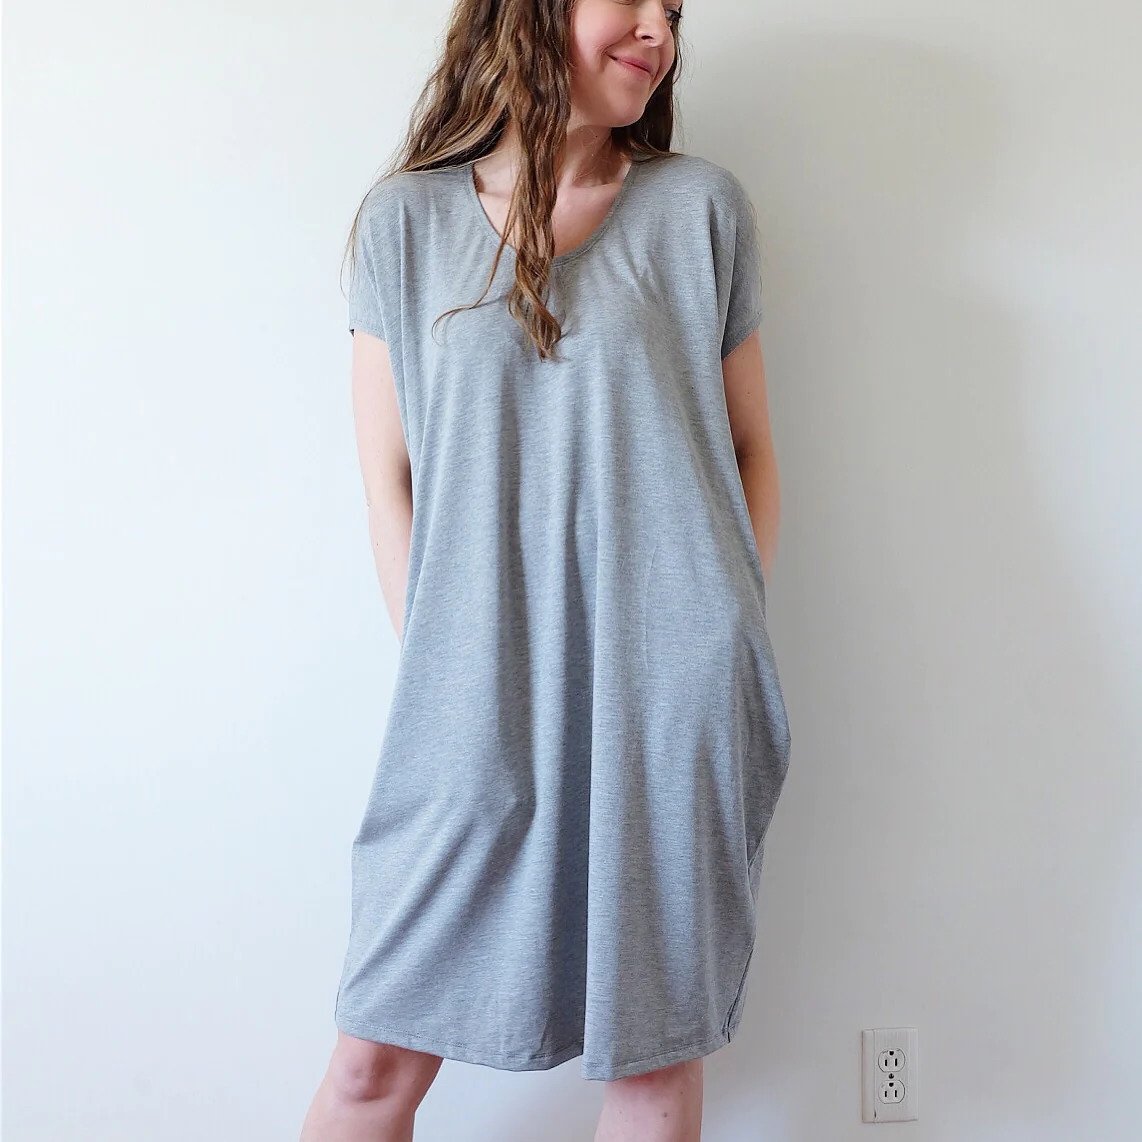 Bamboo Cocoon Dress (60% Off!)